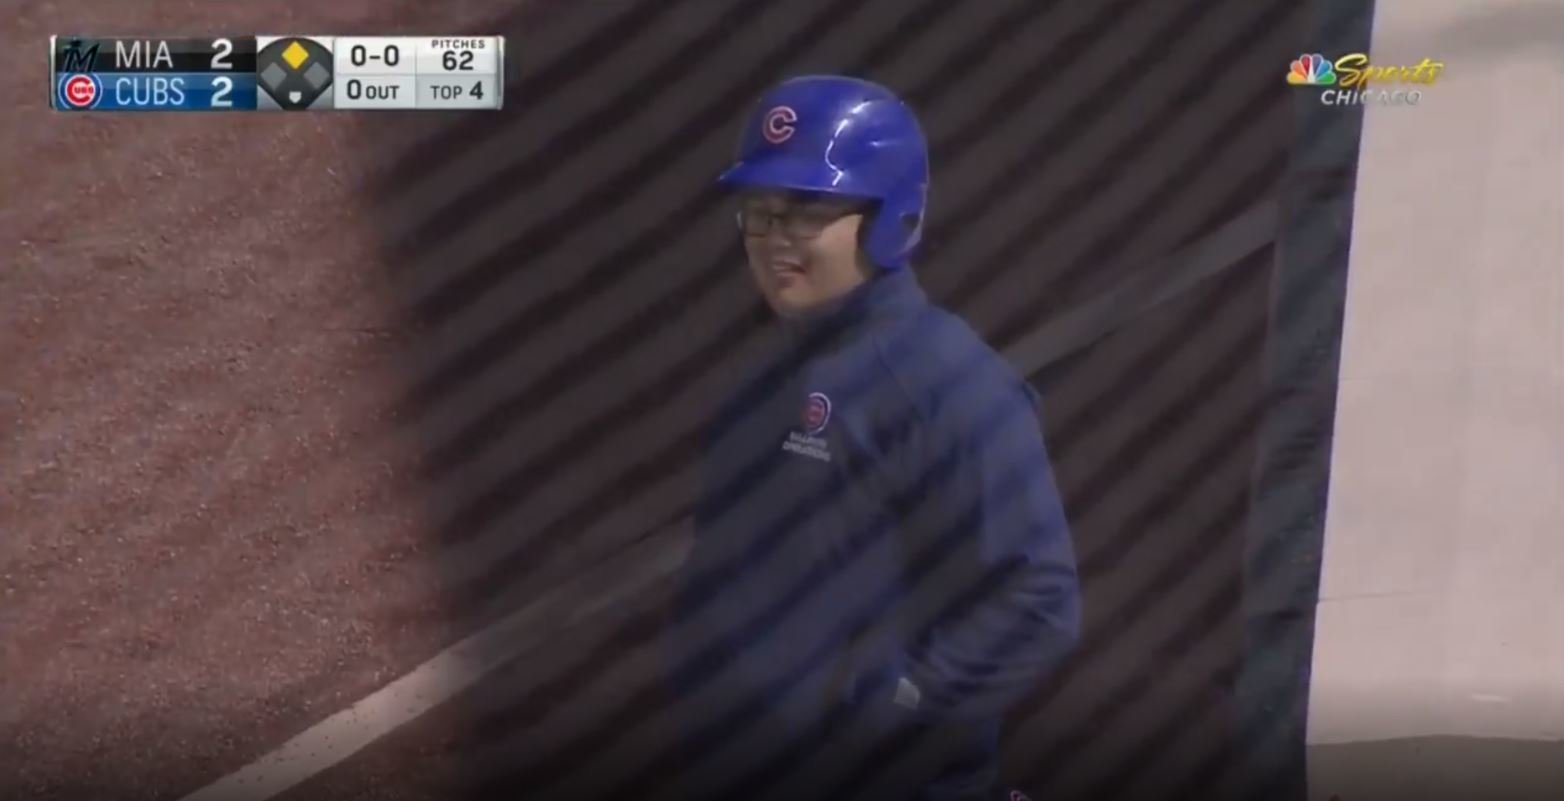 An honest mistake made by a Wrigley Field ball boy benefited the home team.